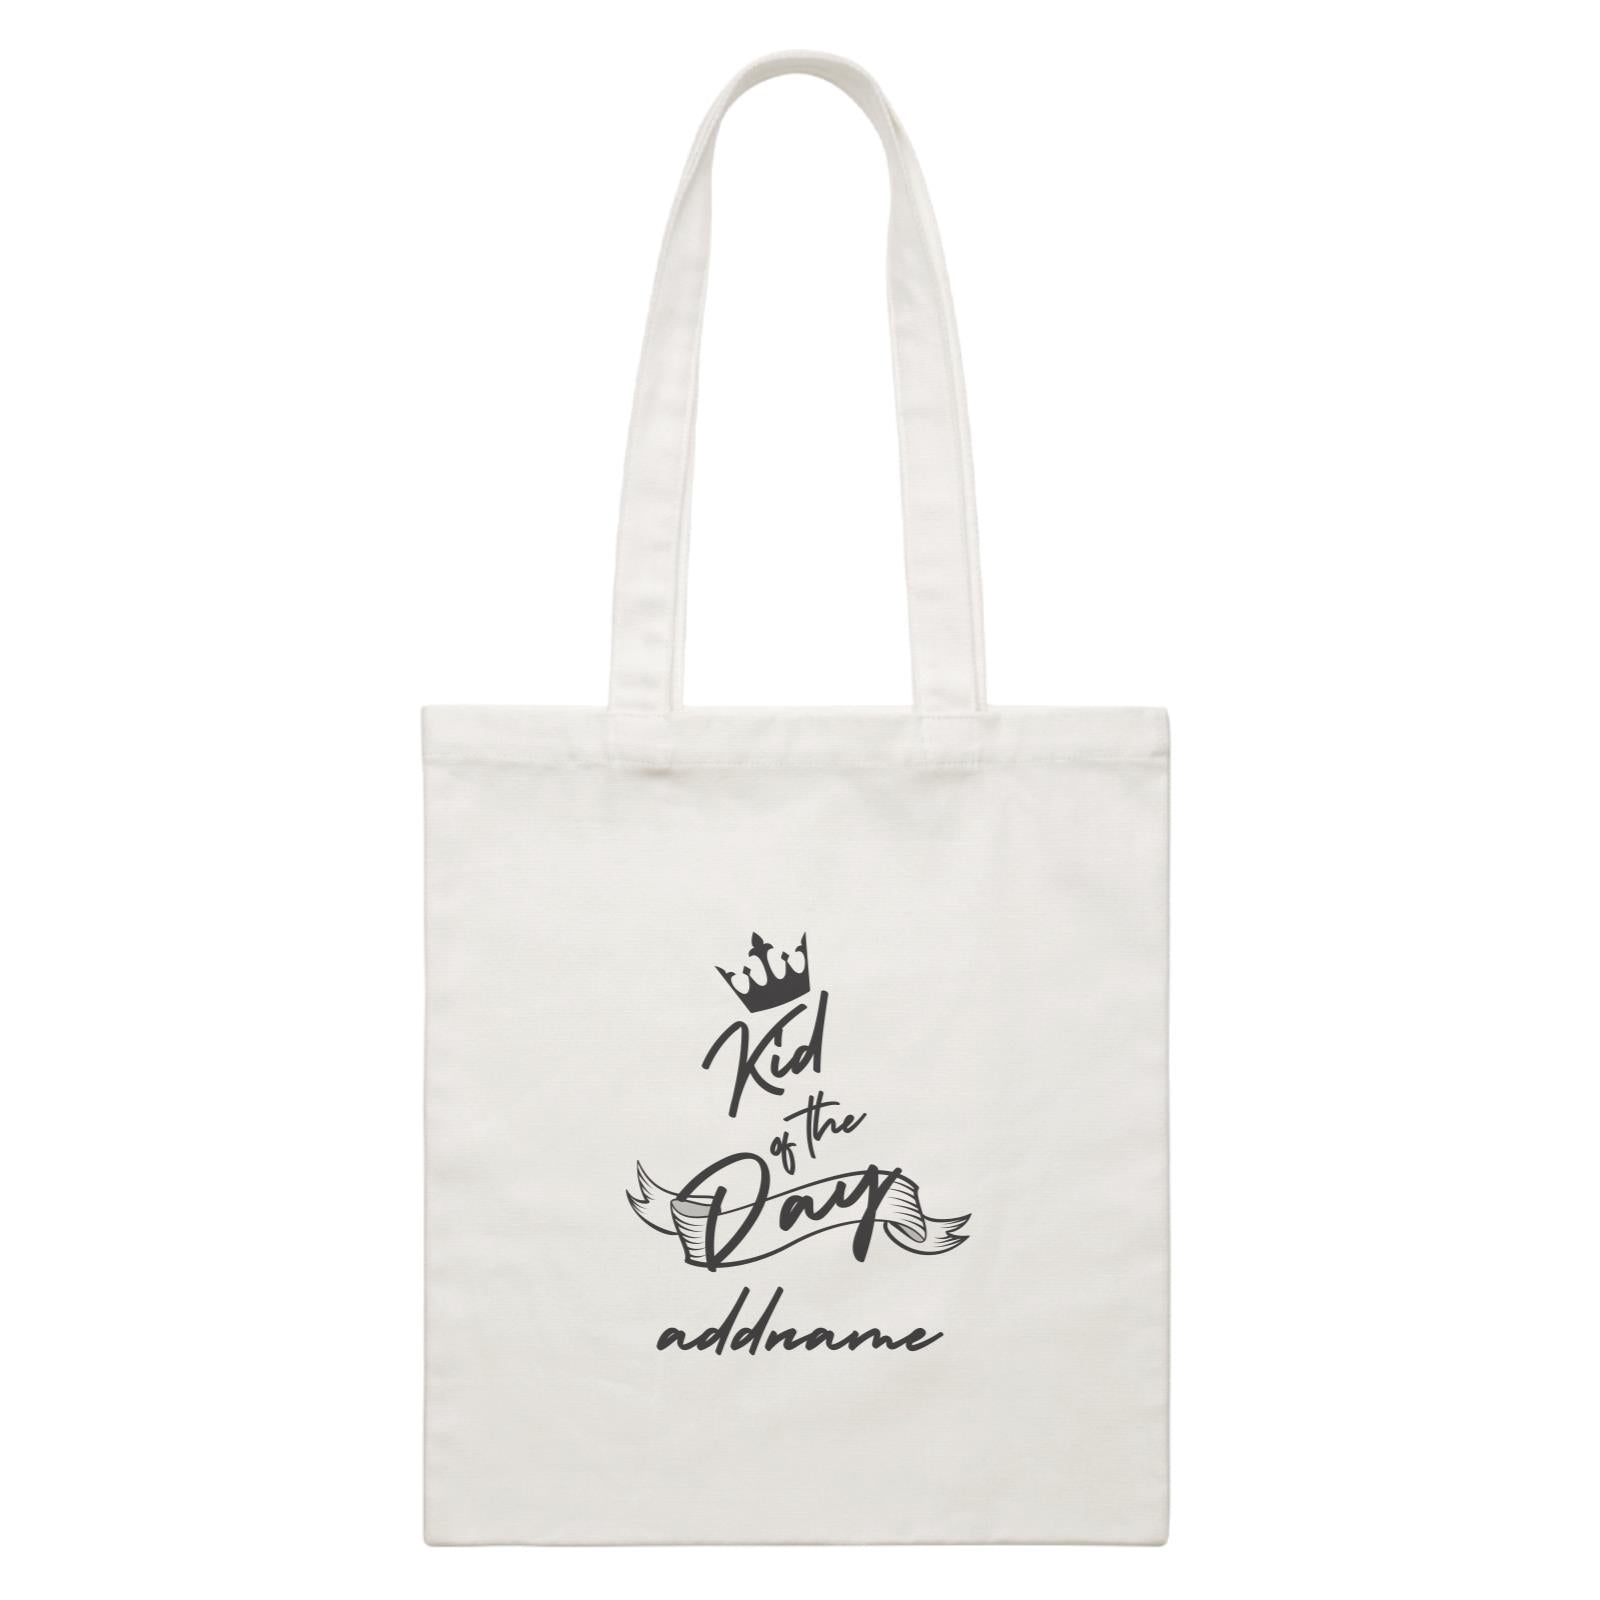 Birthday Typography Kid Of The Day Addname White Canvas Bag